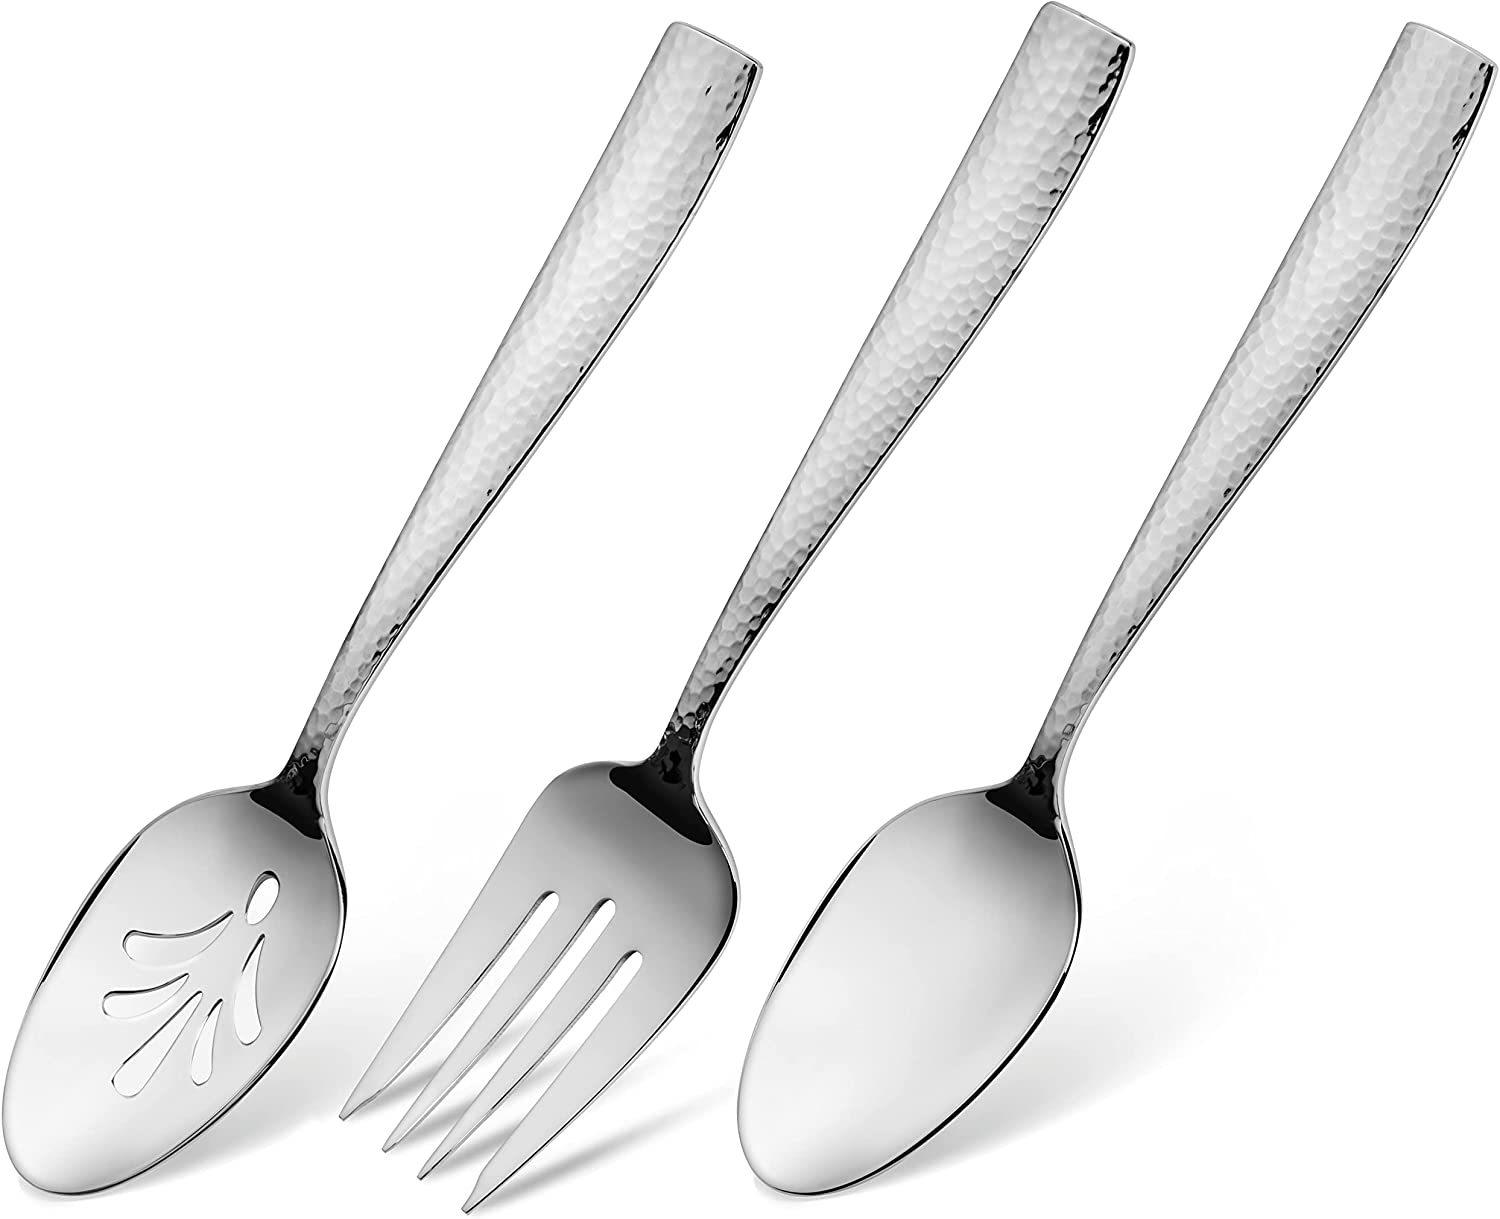 High Quality Hammered Stainless Steel 9 Utensil Set 5 PC Serving Spatula  Spoon By Imperial Home